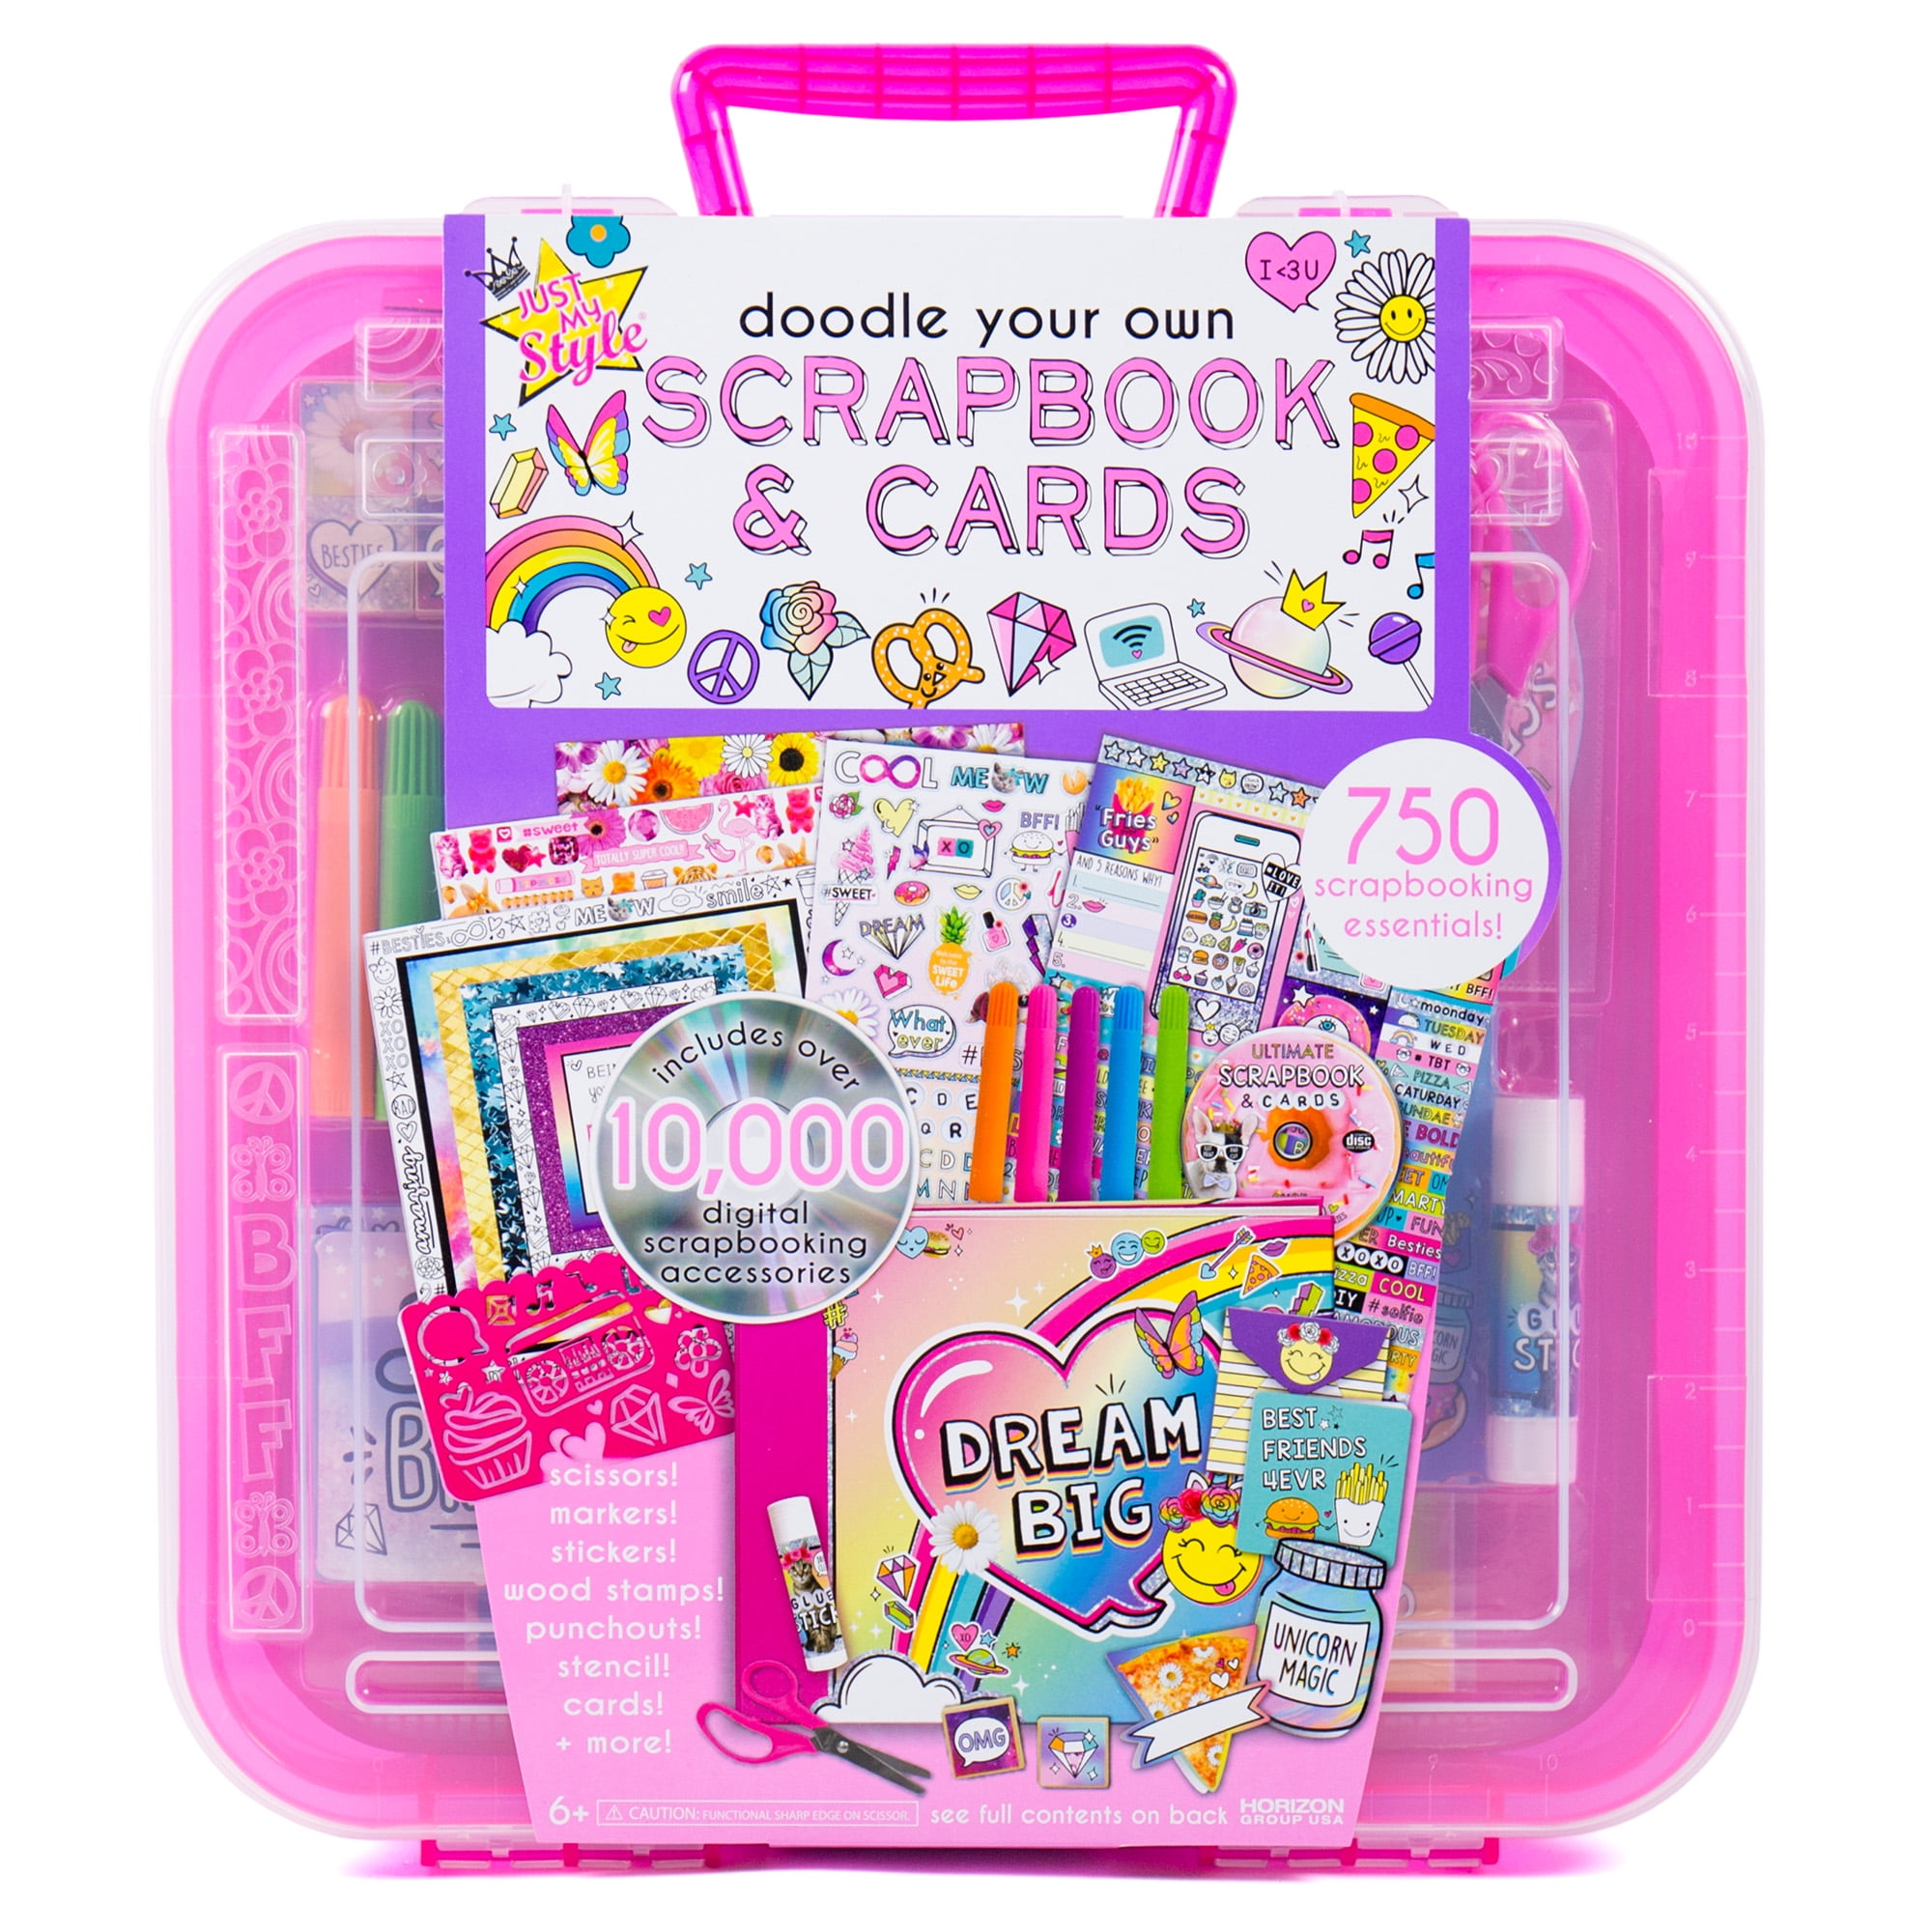 GIRL'S SCRAPBOOK KIT & Accessories! Squad Goals, Girl Power, Ages 6+ - NEW!